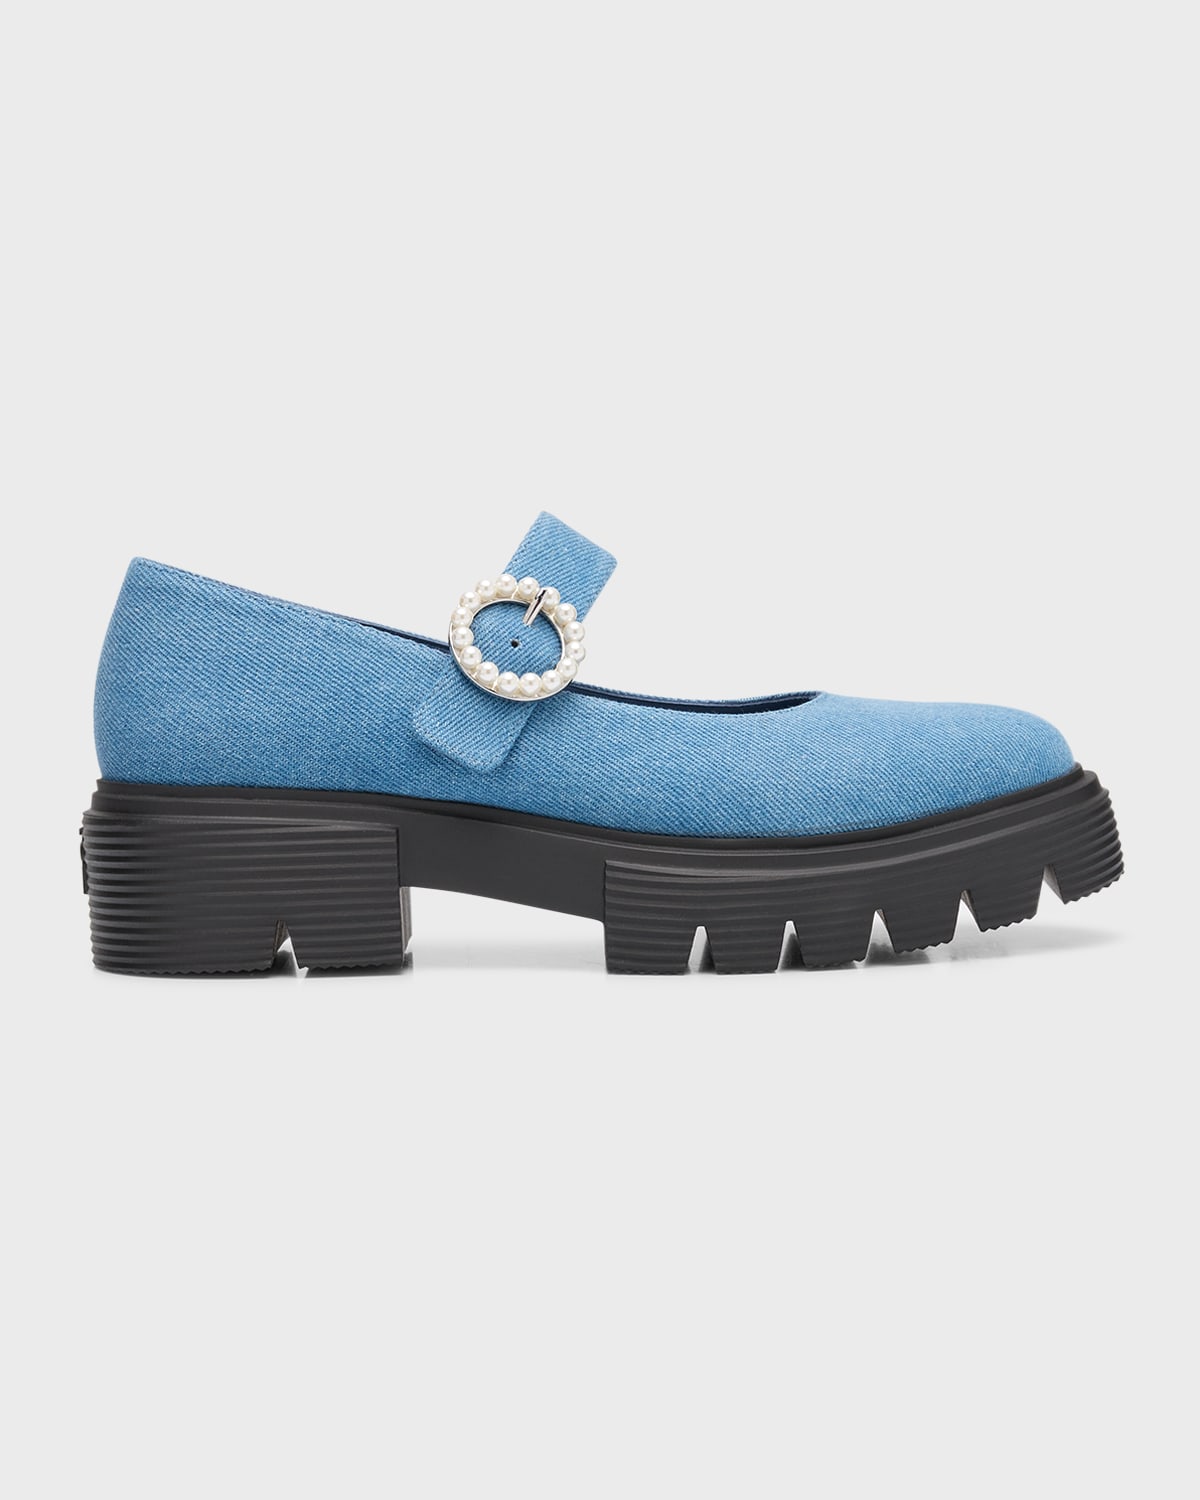 Stuart Weitzman Nolita Denim Pearly Mary Jane Loafers In Washed